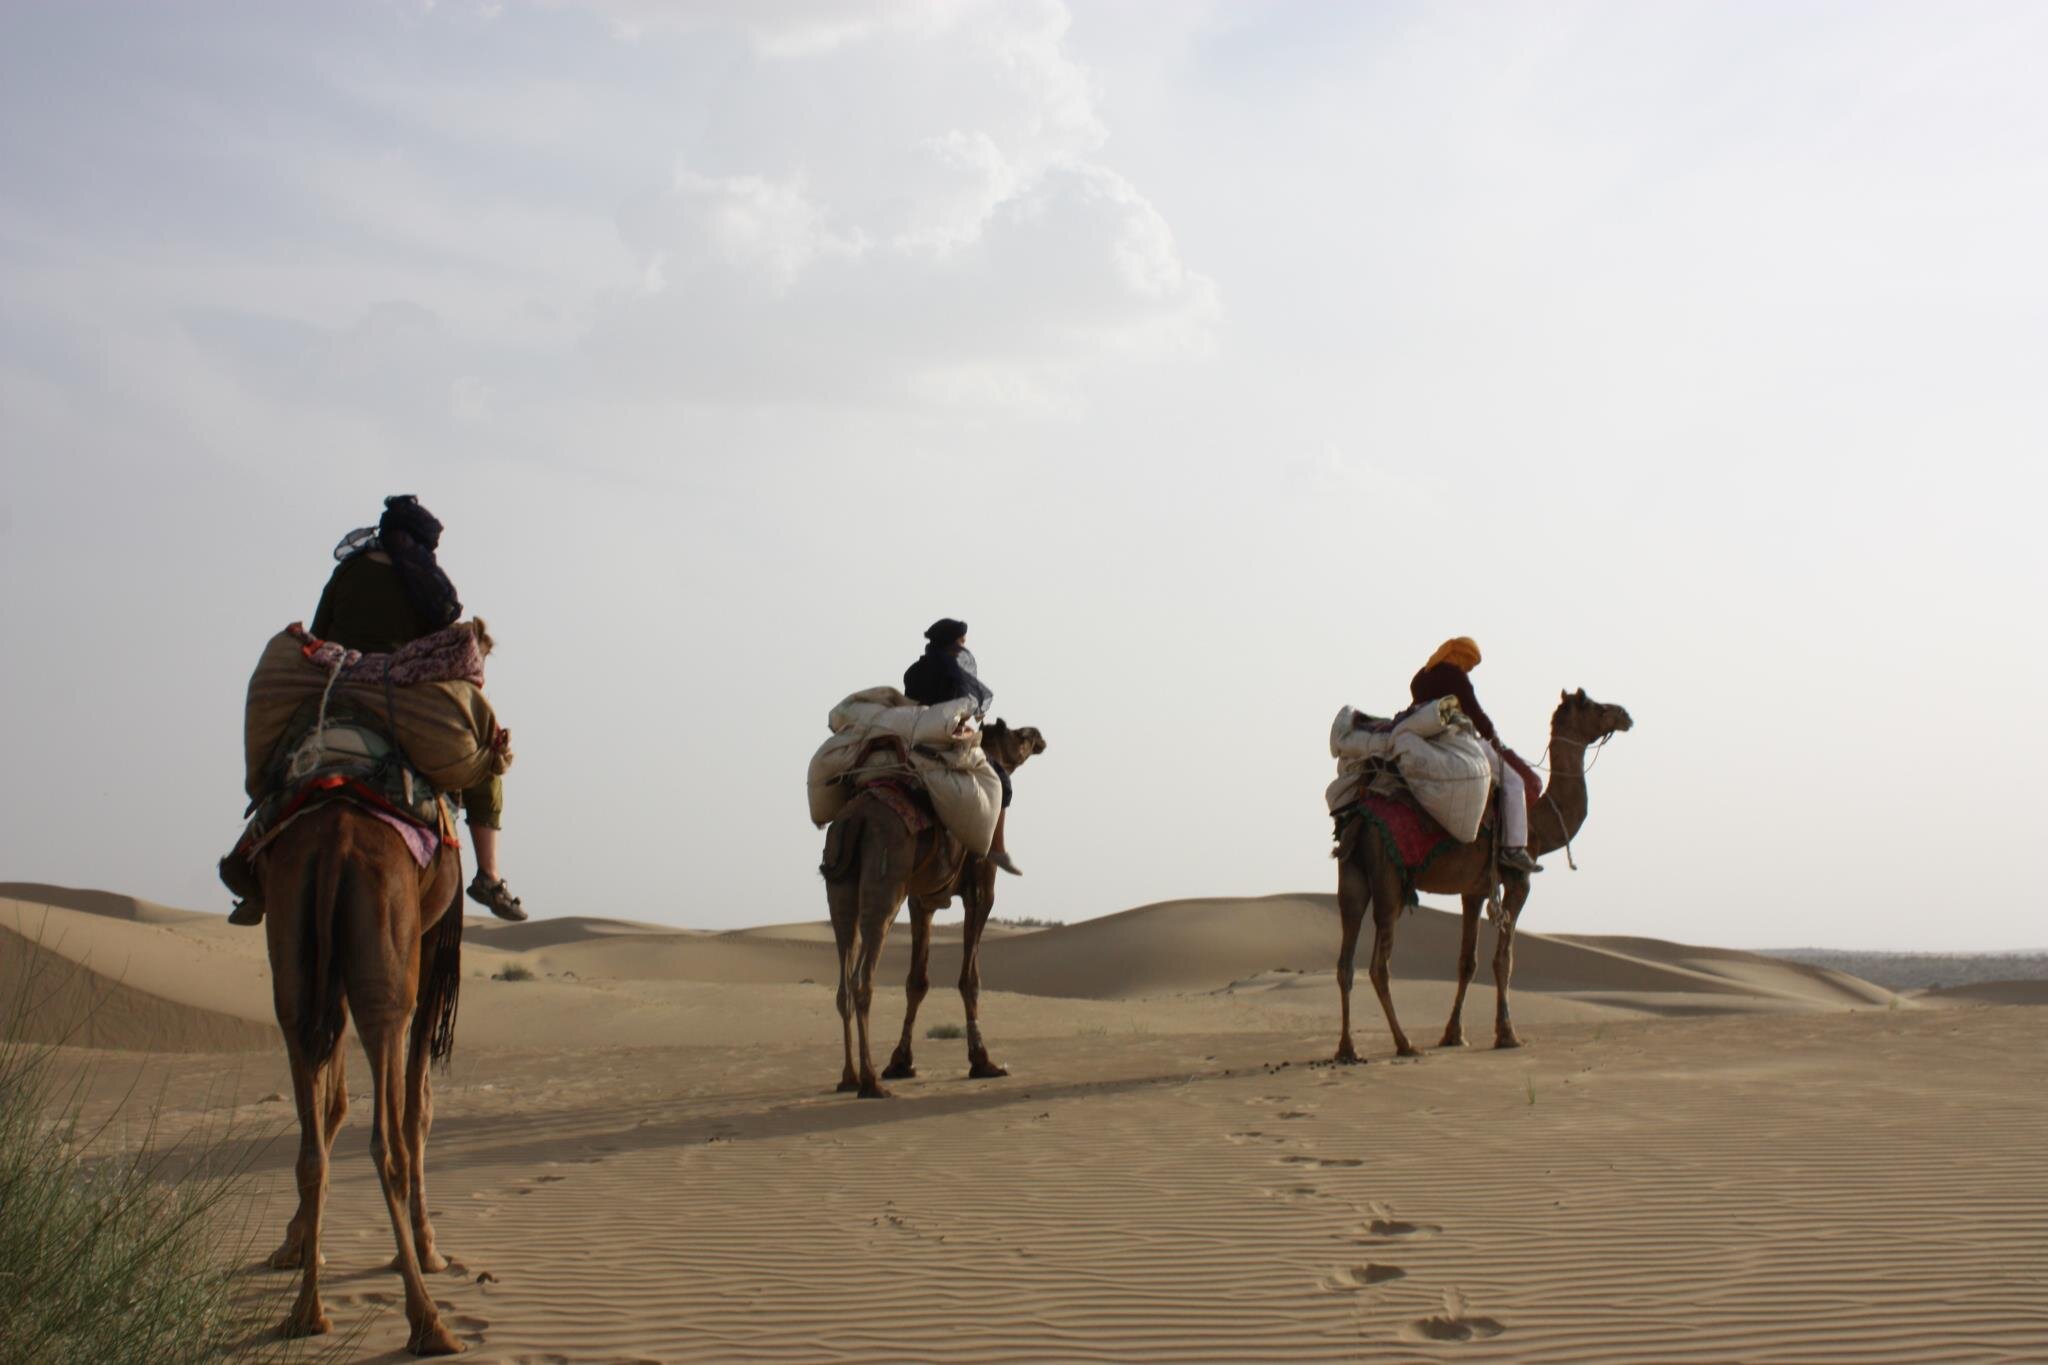 Riding camels in the desert in India